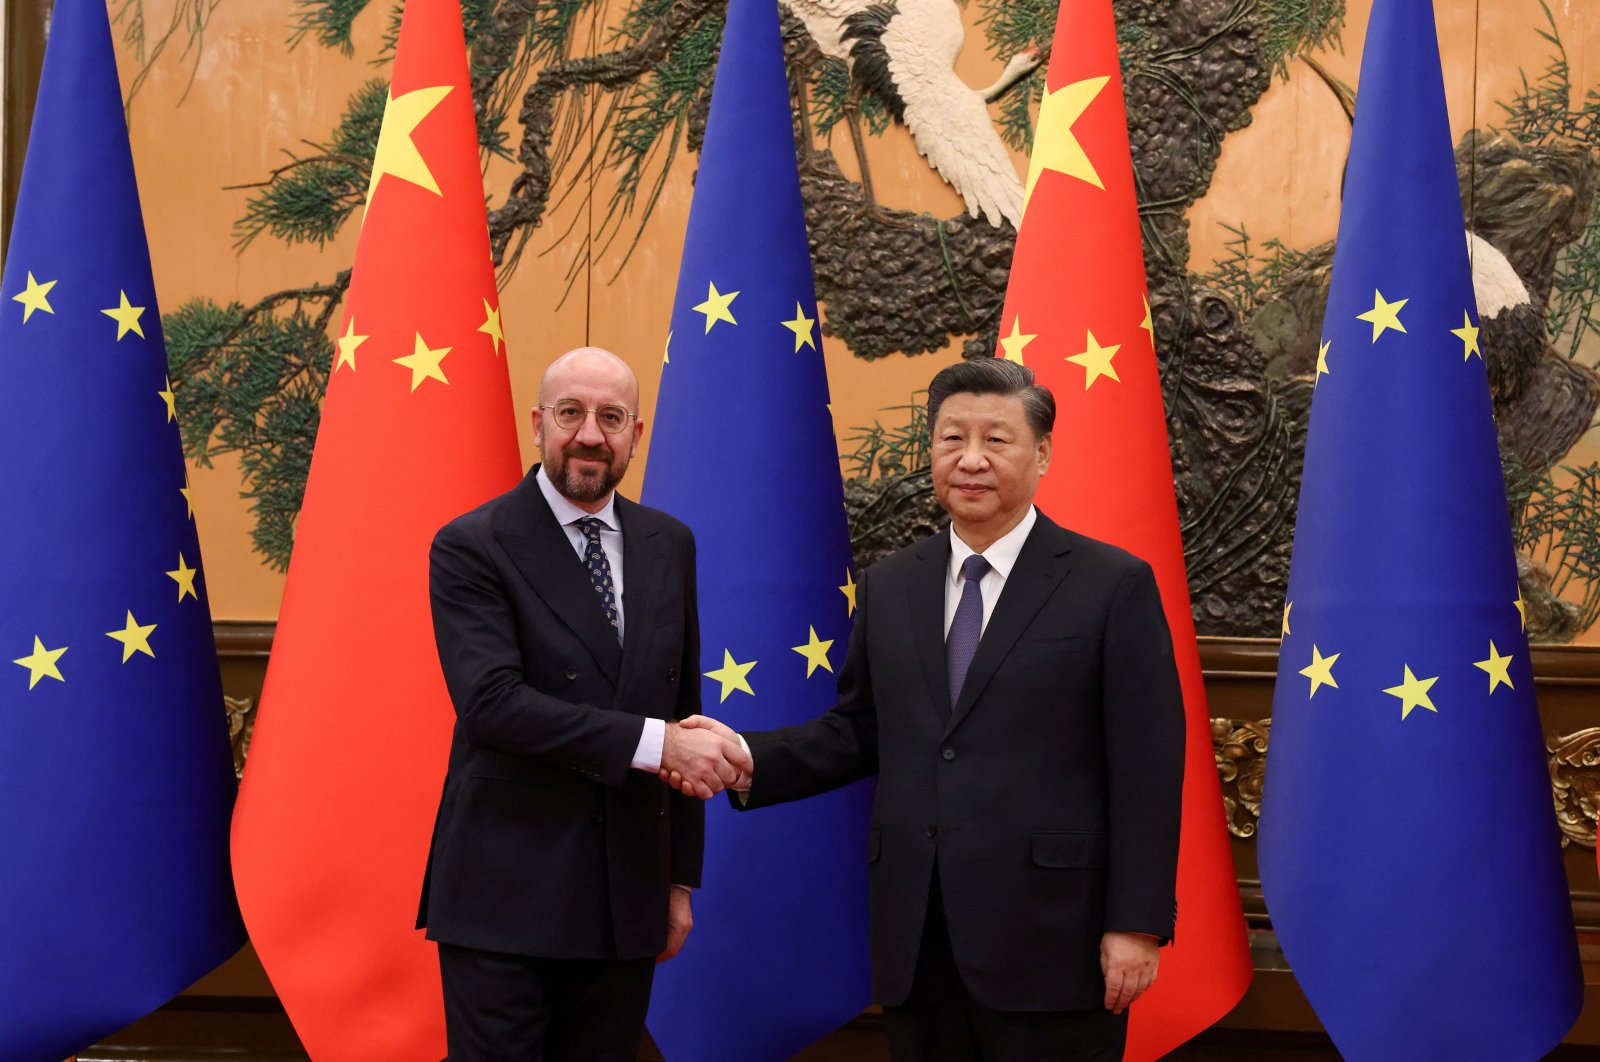 European Council President Charles Michel (L) attends a meeting with Chinese President Xi Jinping (R) at the Great Hall of the People in Beijing, China, Dec. 1, 2022. (Reuters Photo)